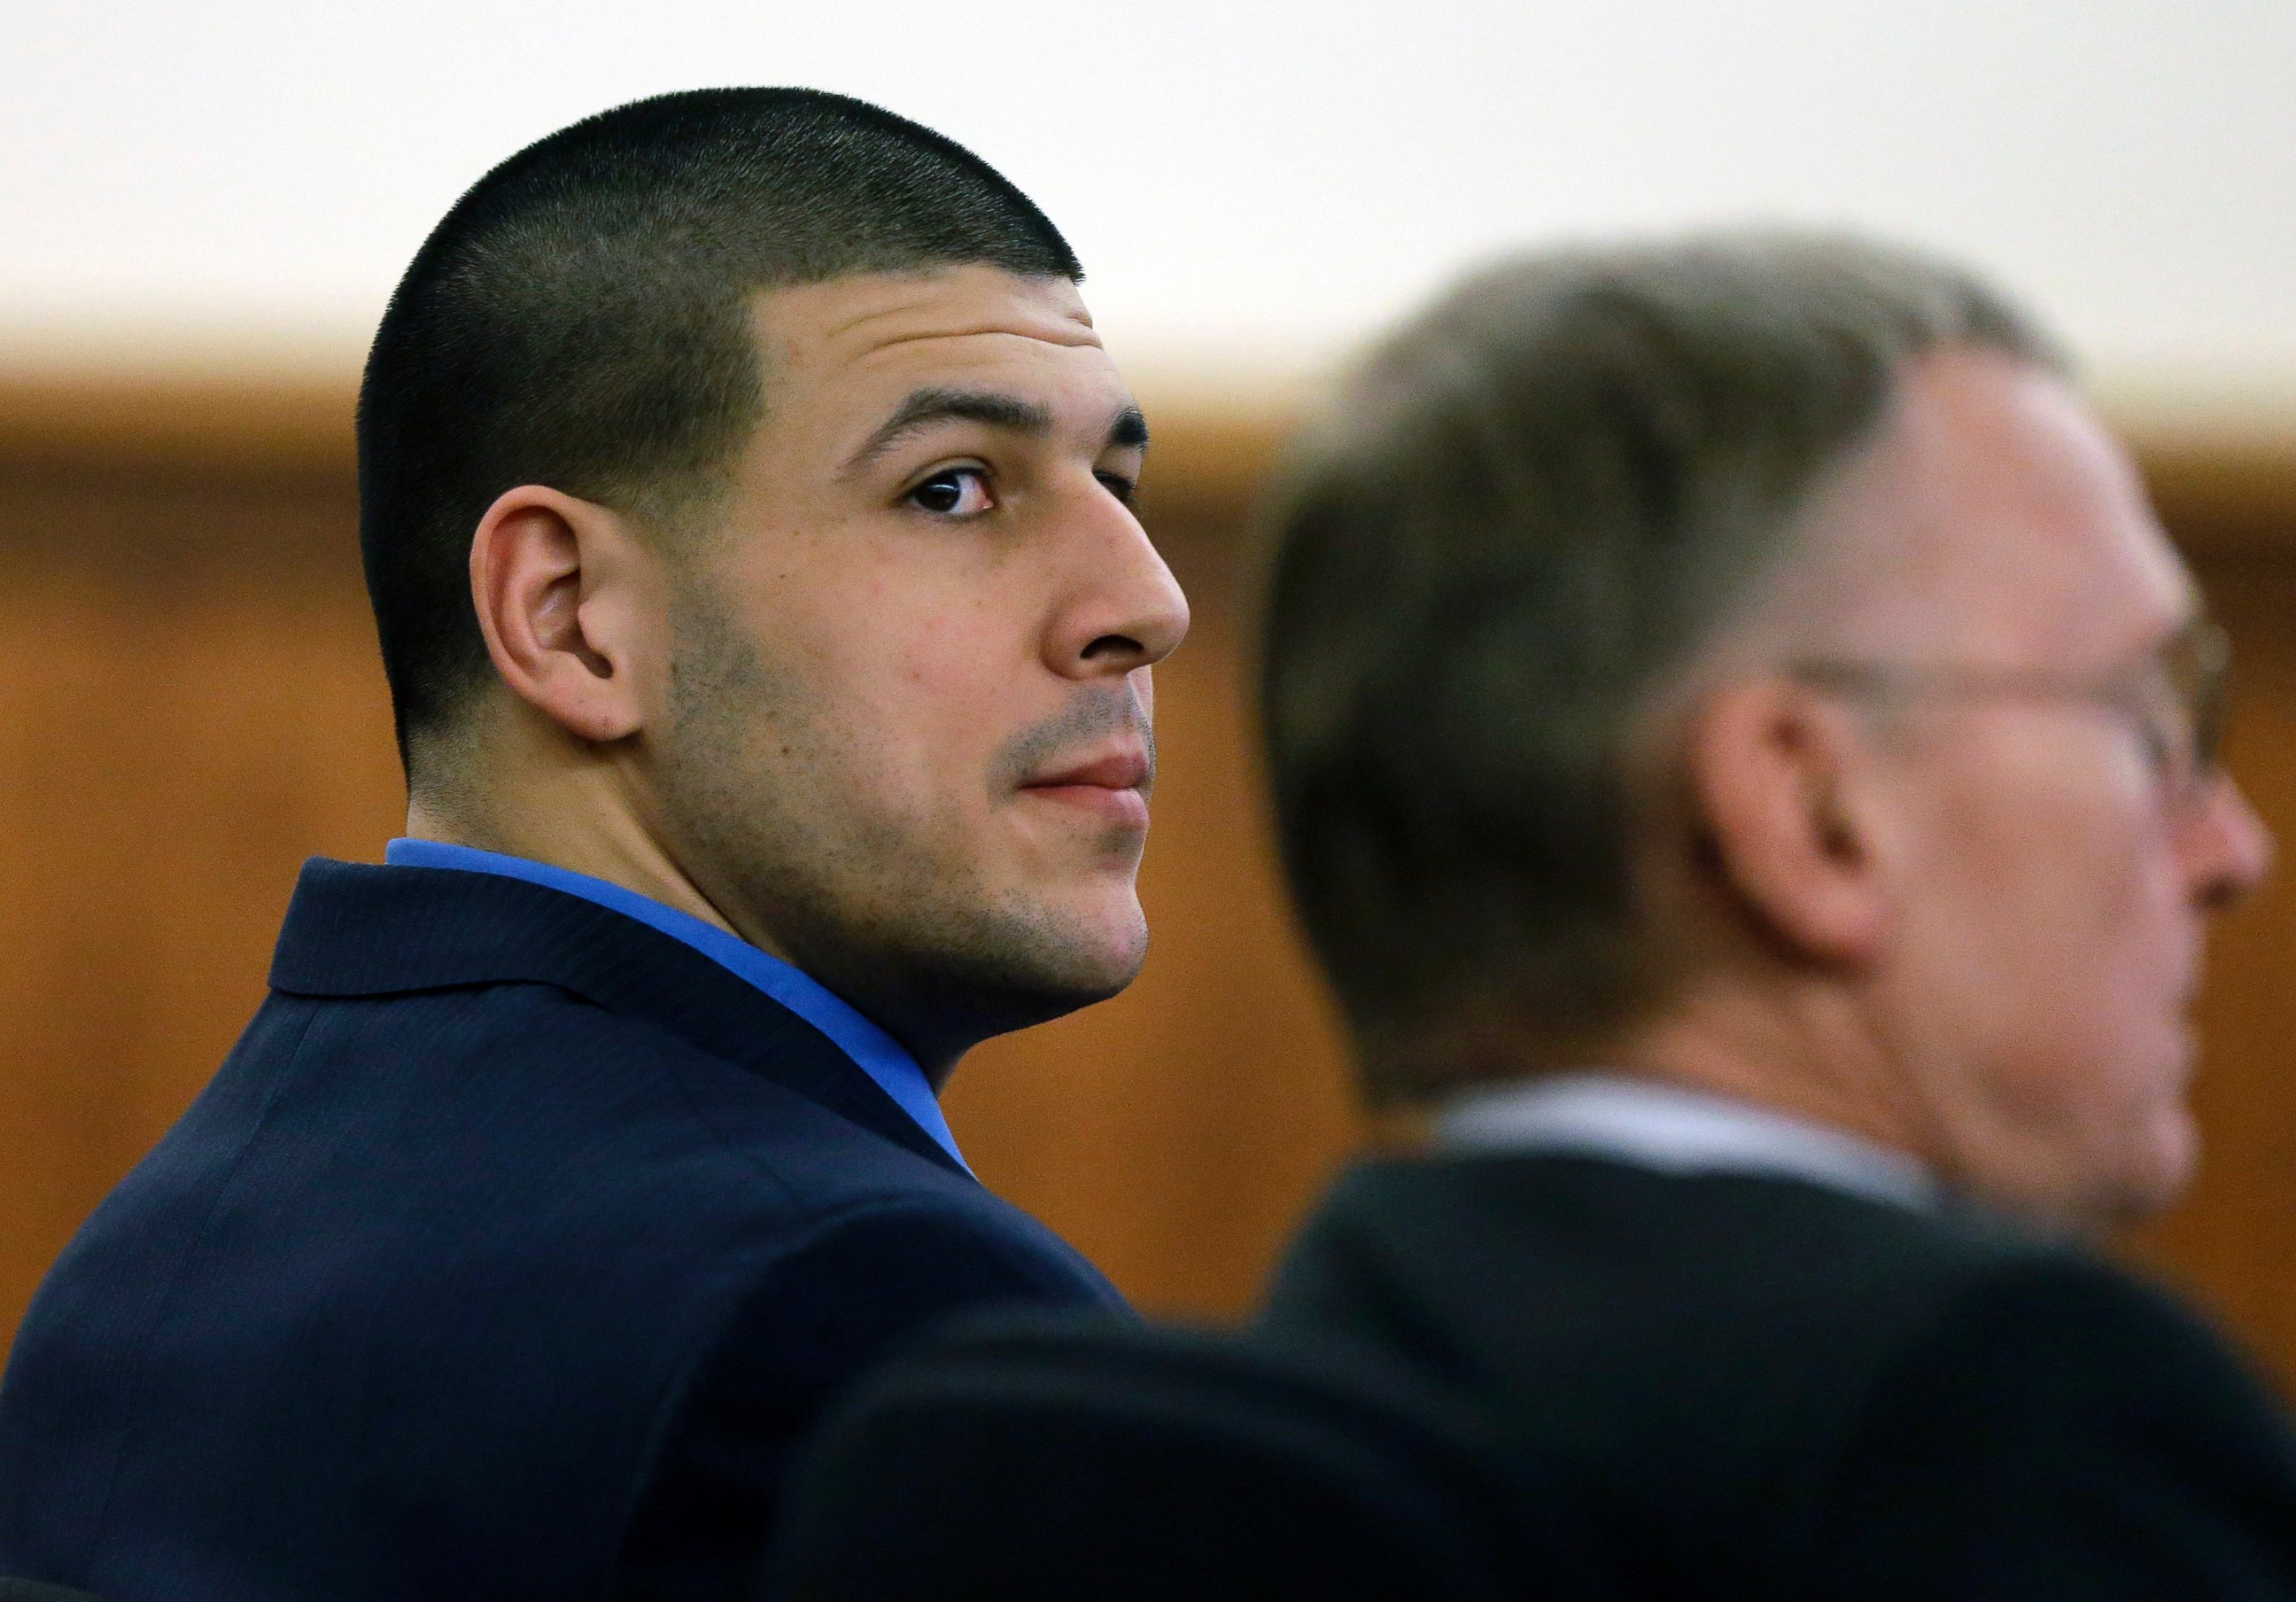 PHOTO: Former New England Patriots football player Aaron Hernandez sits with his defense attorney Charles Rankin during the afternoon session of his murder trial, Feb. 6, 2015, in Fall River, Mass.